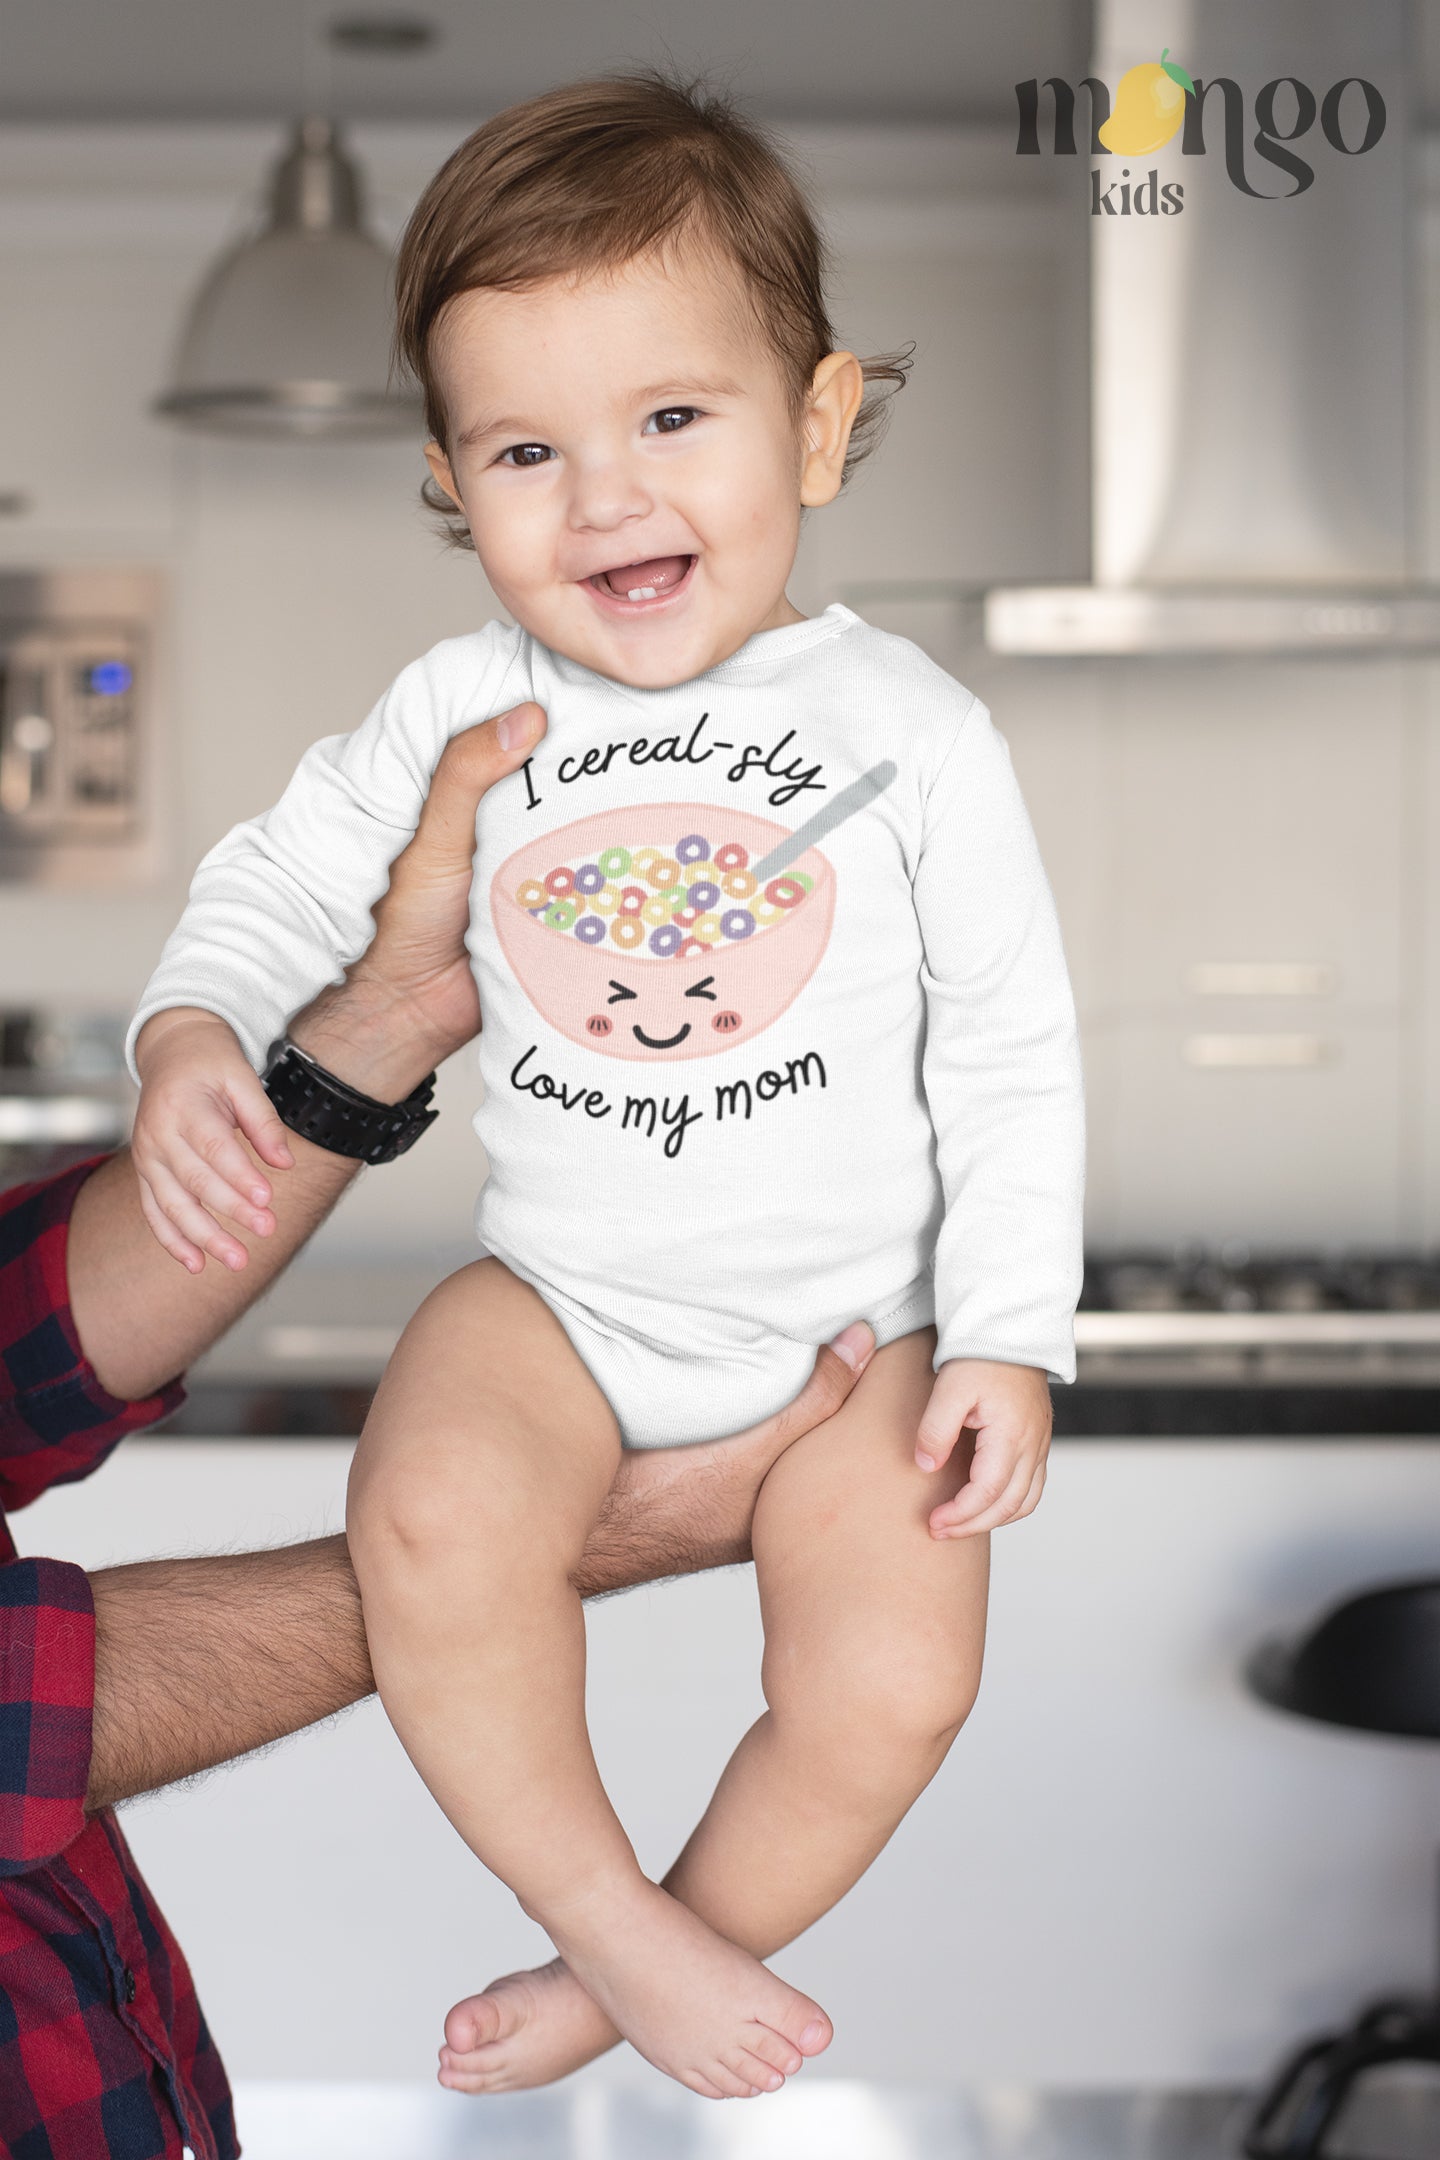 Long Sleeve Onesie - Cute cereal bowl graphic print with customizable text - 'I Cereal-sly Love My Mom' on a kid t-shirt and baby onesie. High-quality and vibrant design for adorable children's clothing. Perfect gift option to express love for Mom. 